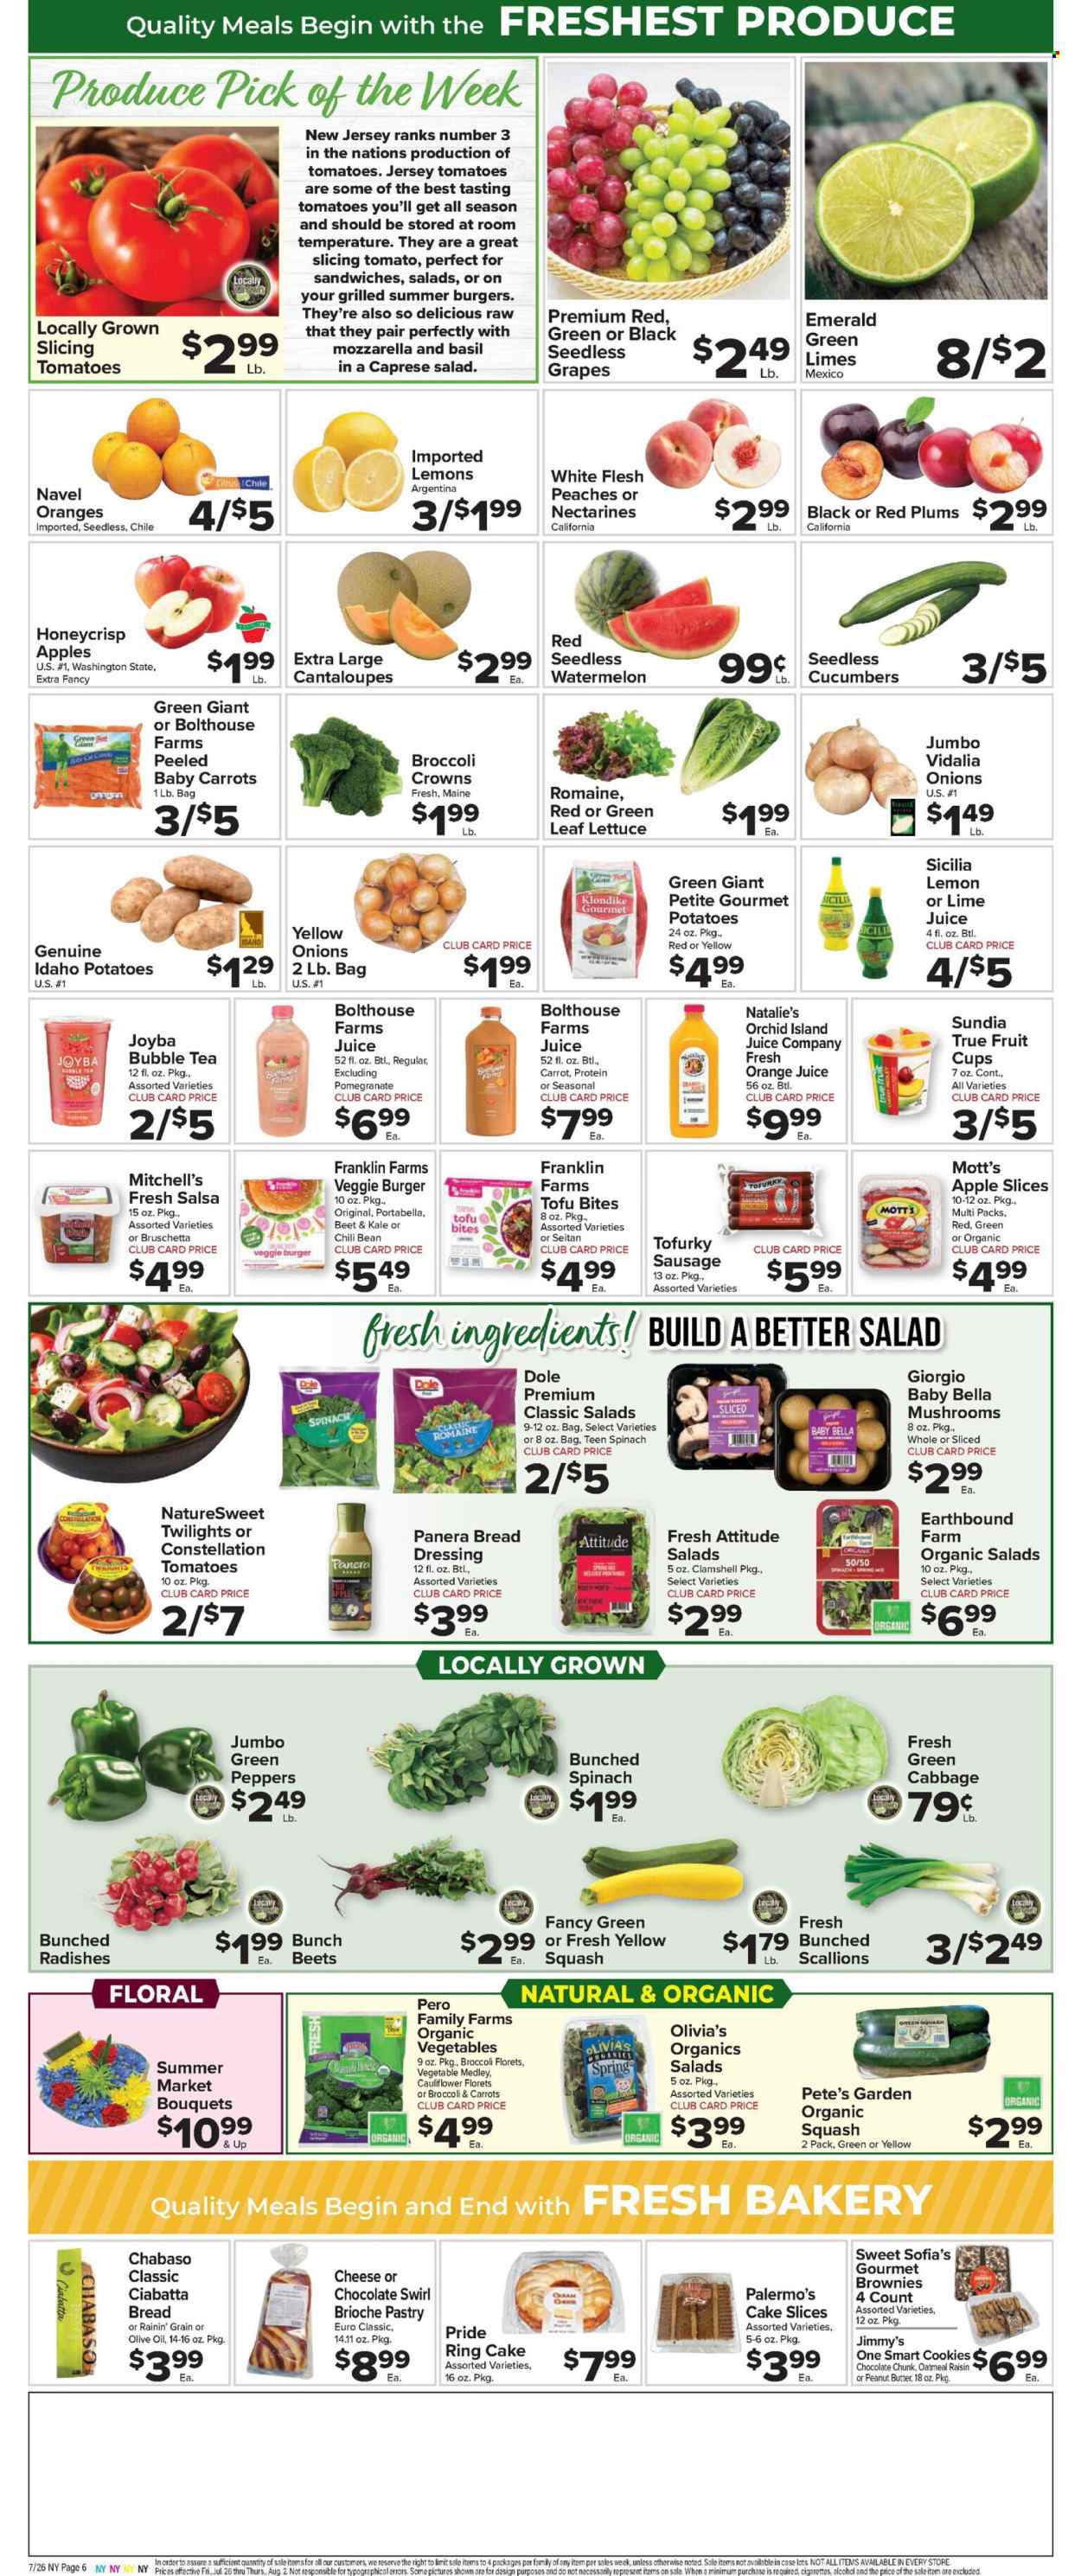 thumbnail - Foodtown Flyer - 07/26/2024 - 08/01/2024 - Sales products - portobello mushrooms, baby bella mushrooms, ciabatta, cake, brioche, brownies, chocolate swirl, cantaloupe, carrots, cauliflower, salad greens, tomatoes, zucchini, potatoes, salad, Dole, yellow squash, green pepper, grapes, limes, nectarines, seedless grapes, watermelon, plums, red plums, fruit cup, melons, peaches, Mott's, sandwich, veggie burger, plant based ready meal, plant based product, chorizo, cheese, tofu, cookies, fruit slices, basil, dressing, salsa, olive oil, oil, orange juice, lime juice, tea, bubble tea, alcohol, bouquet, houseplant, orchid, navel oranges. Page 8.